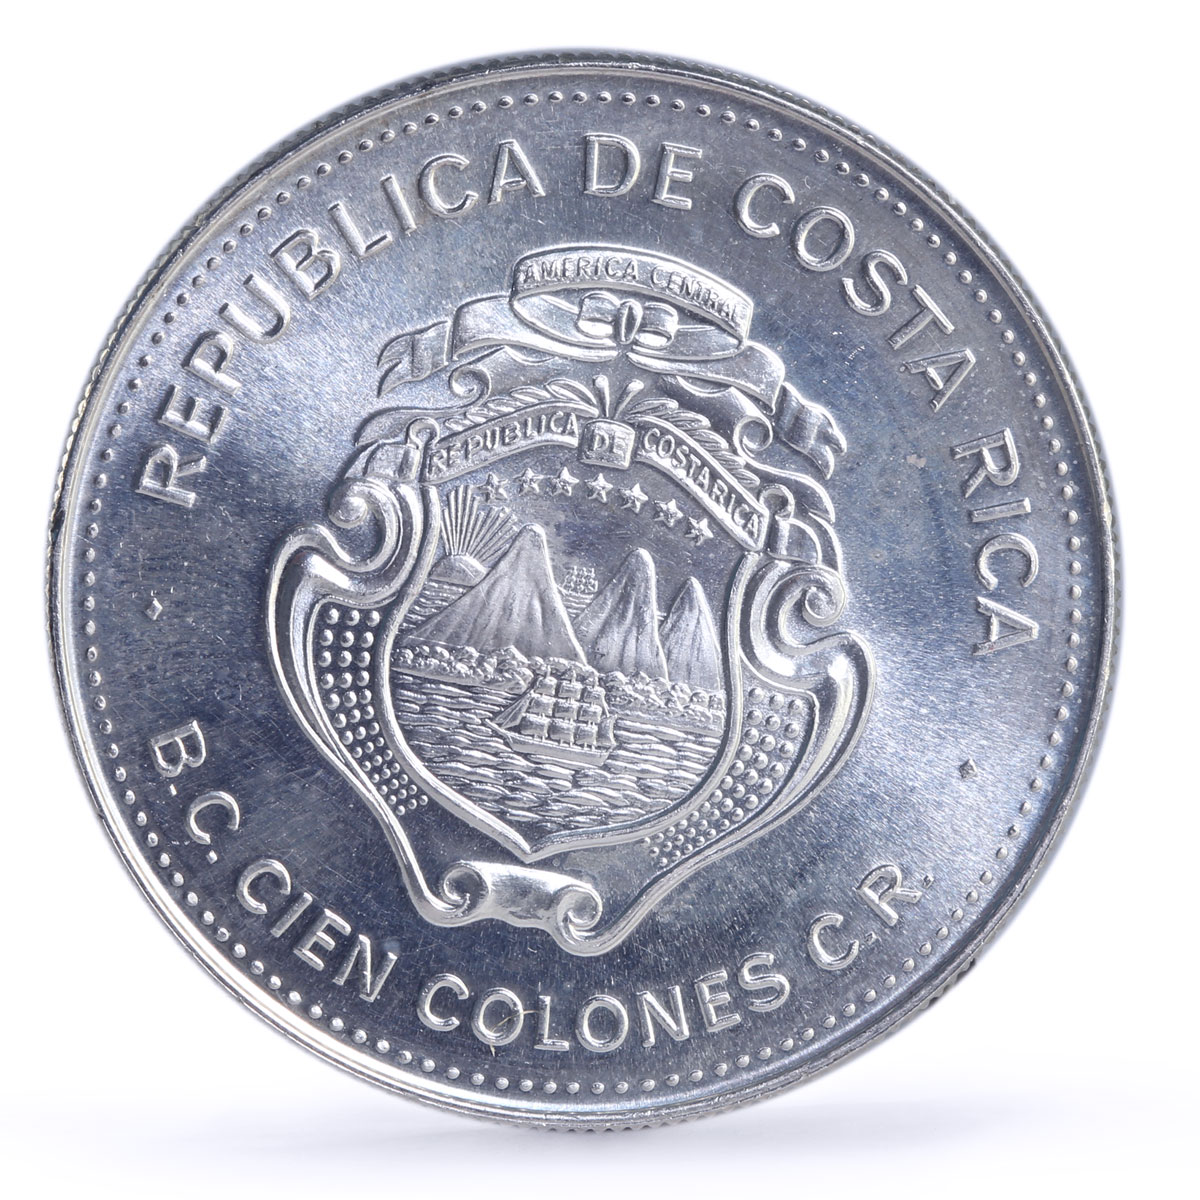 Costa Rica 100 colones International Year of the Child Birds silver coin 1979